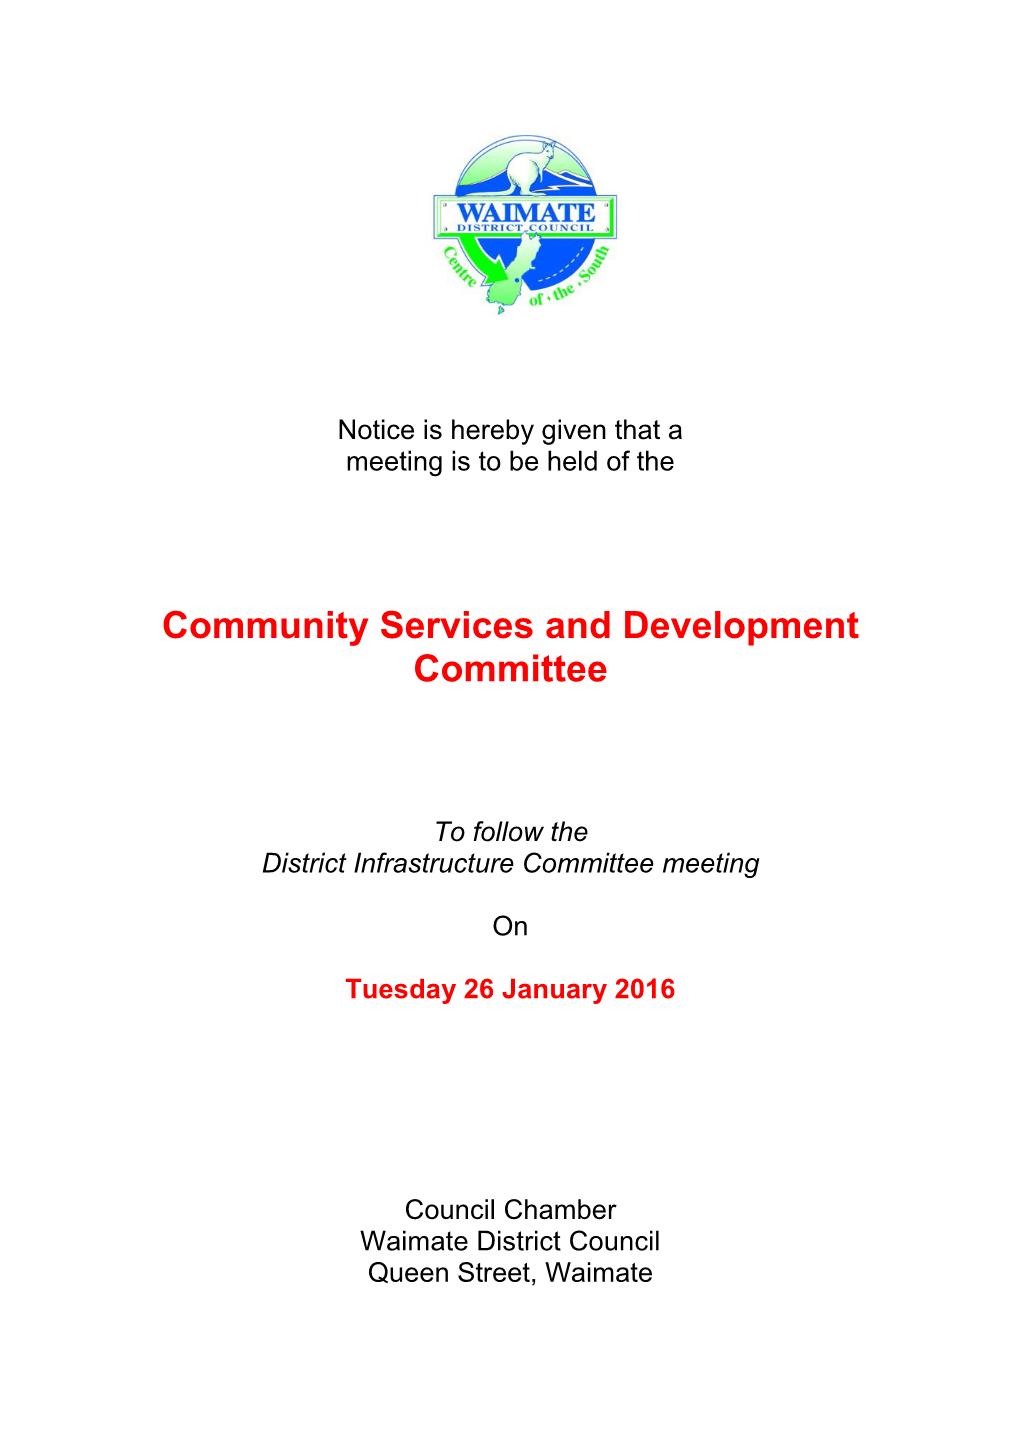 Community Services and Development Committee